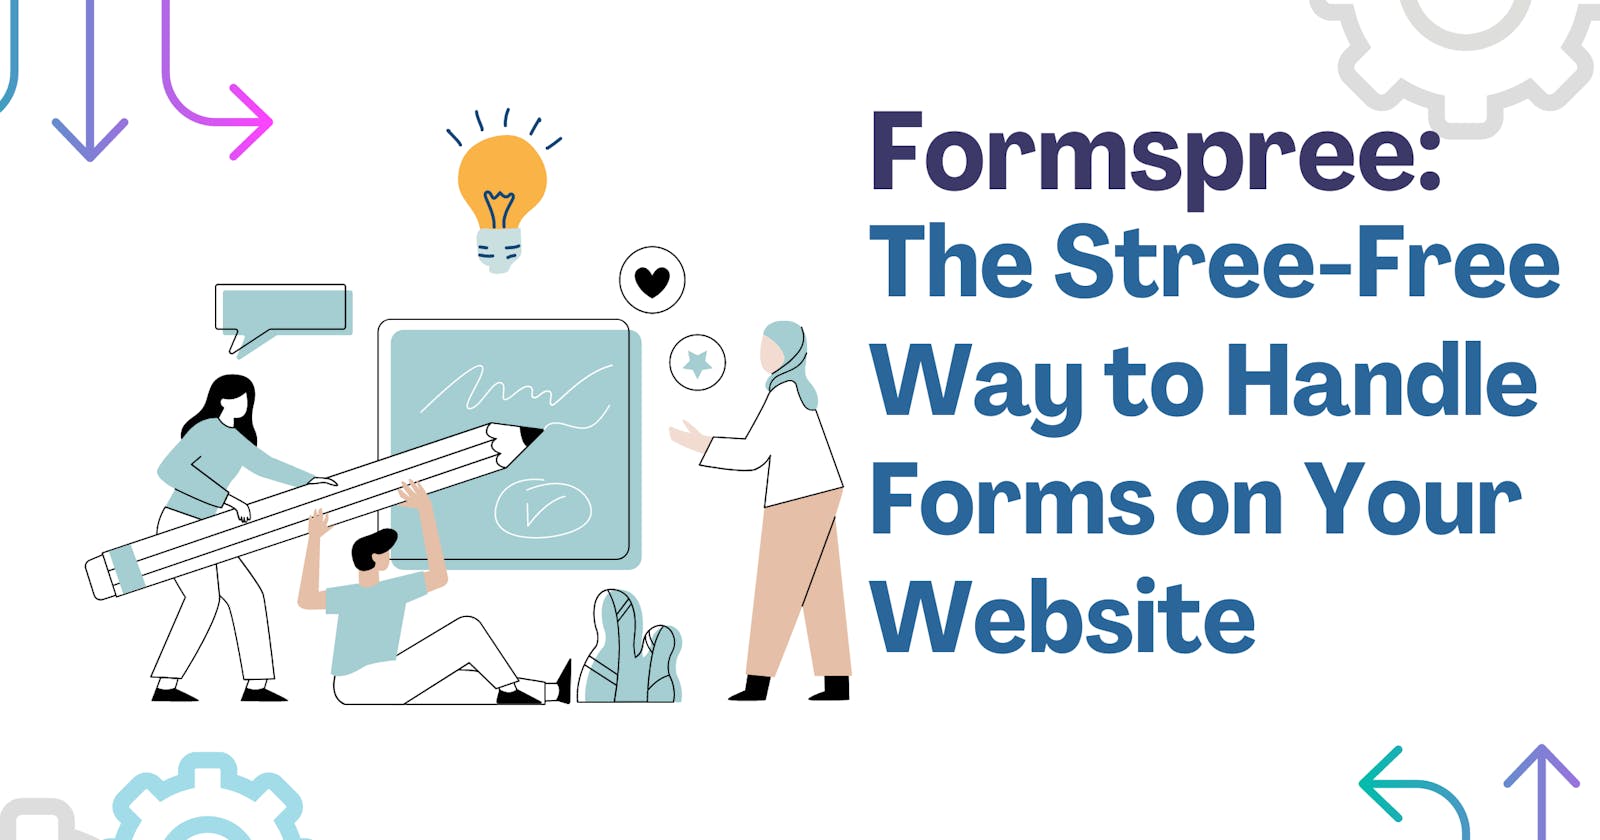 Formspree: The Stress-Free Way to Handle Forms on Your Website